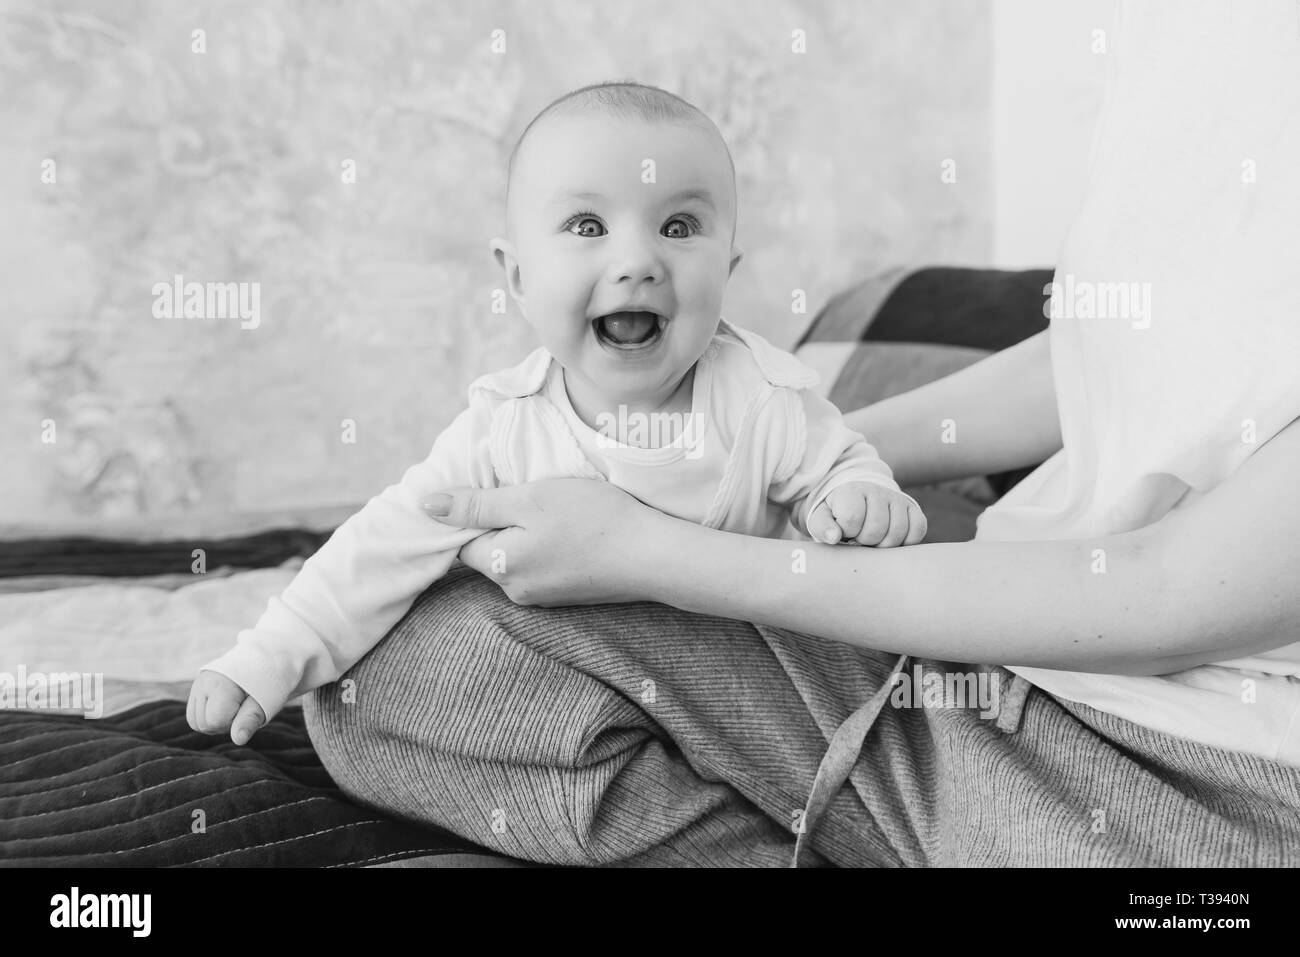 Portrait of smiling cute baby girl indoors Stock Photo